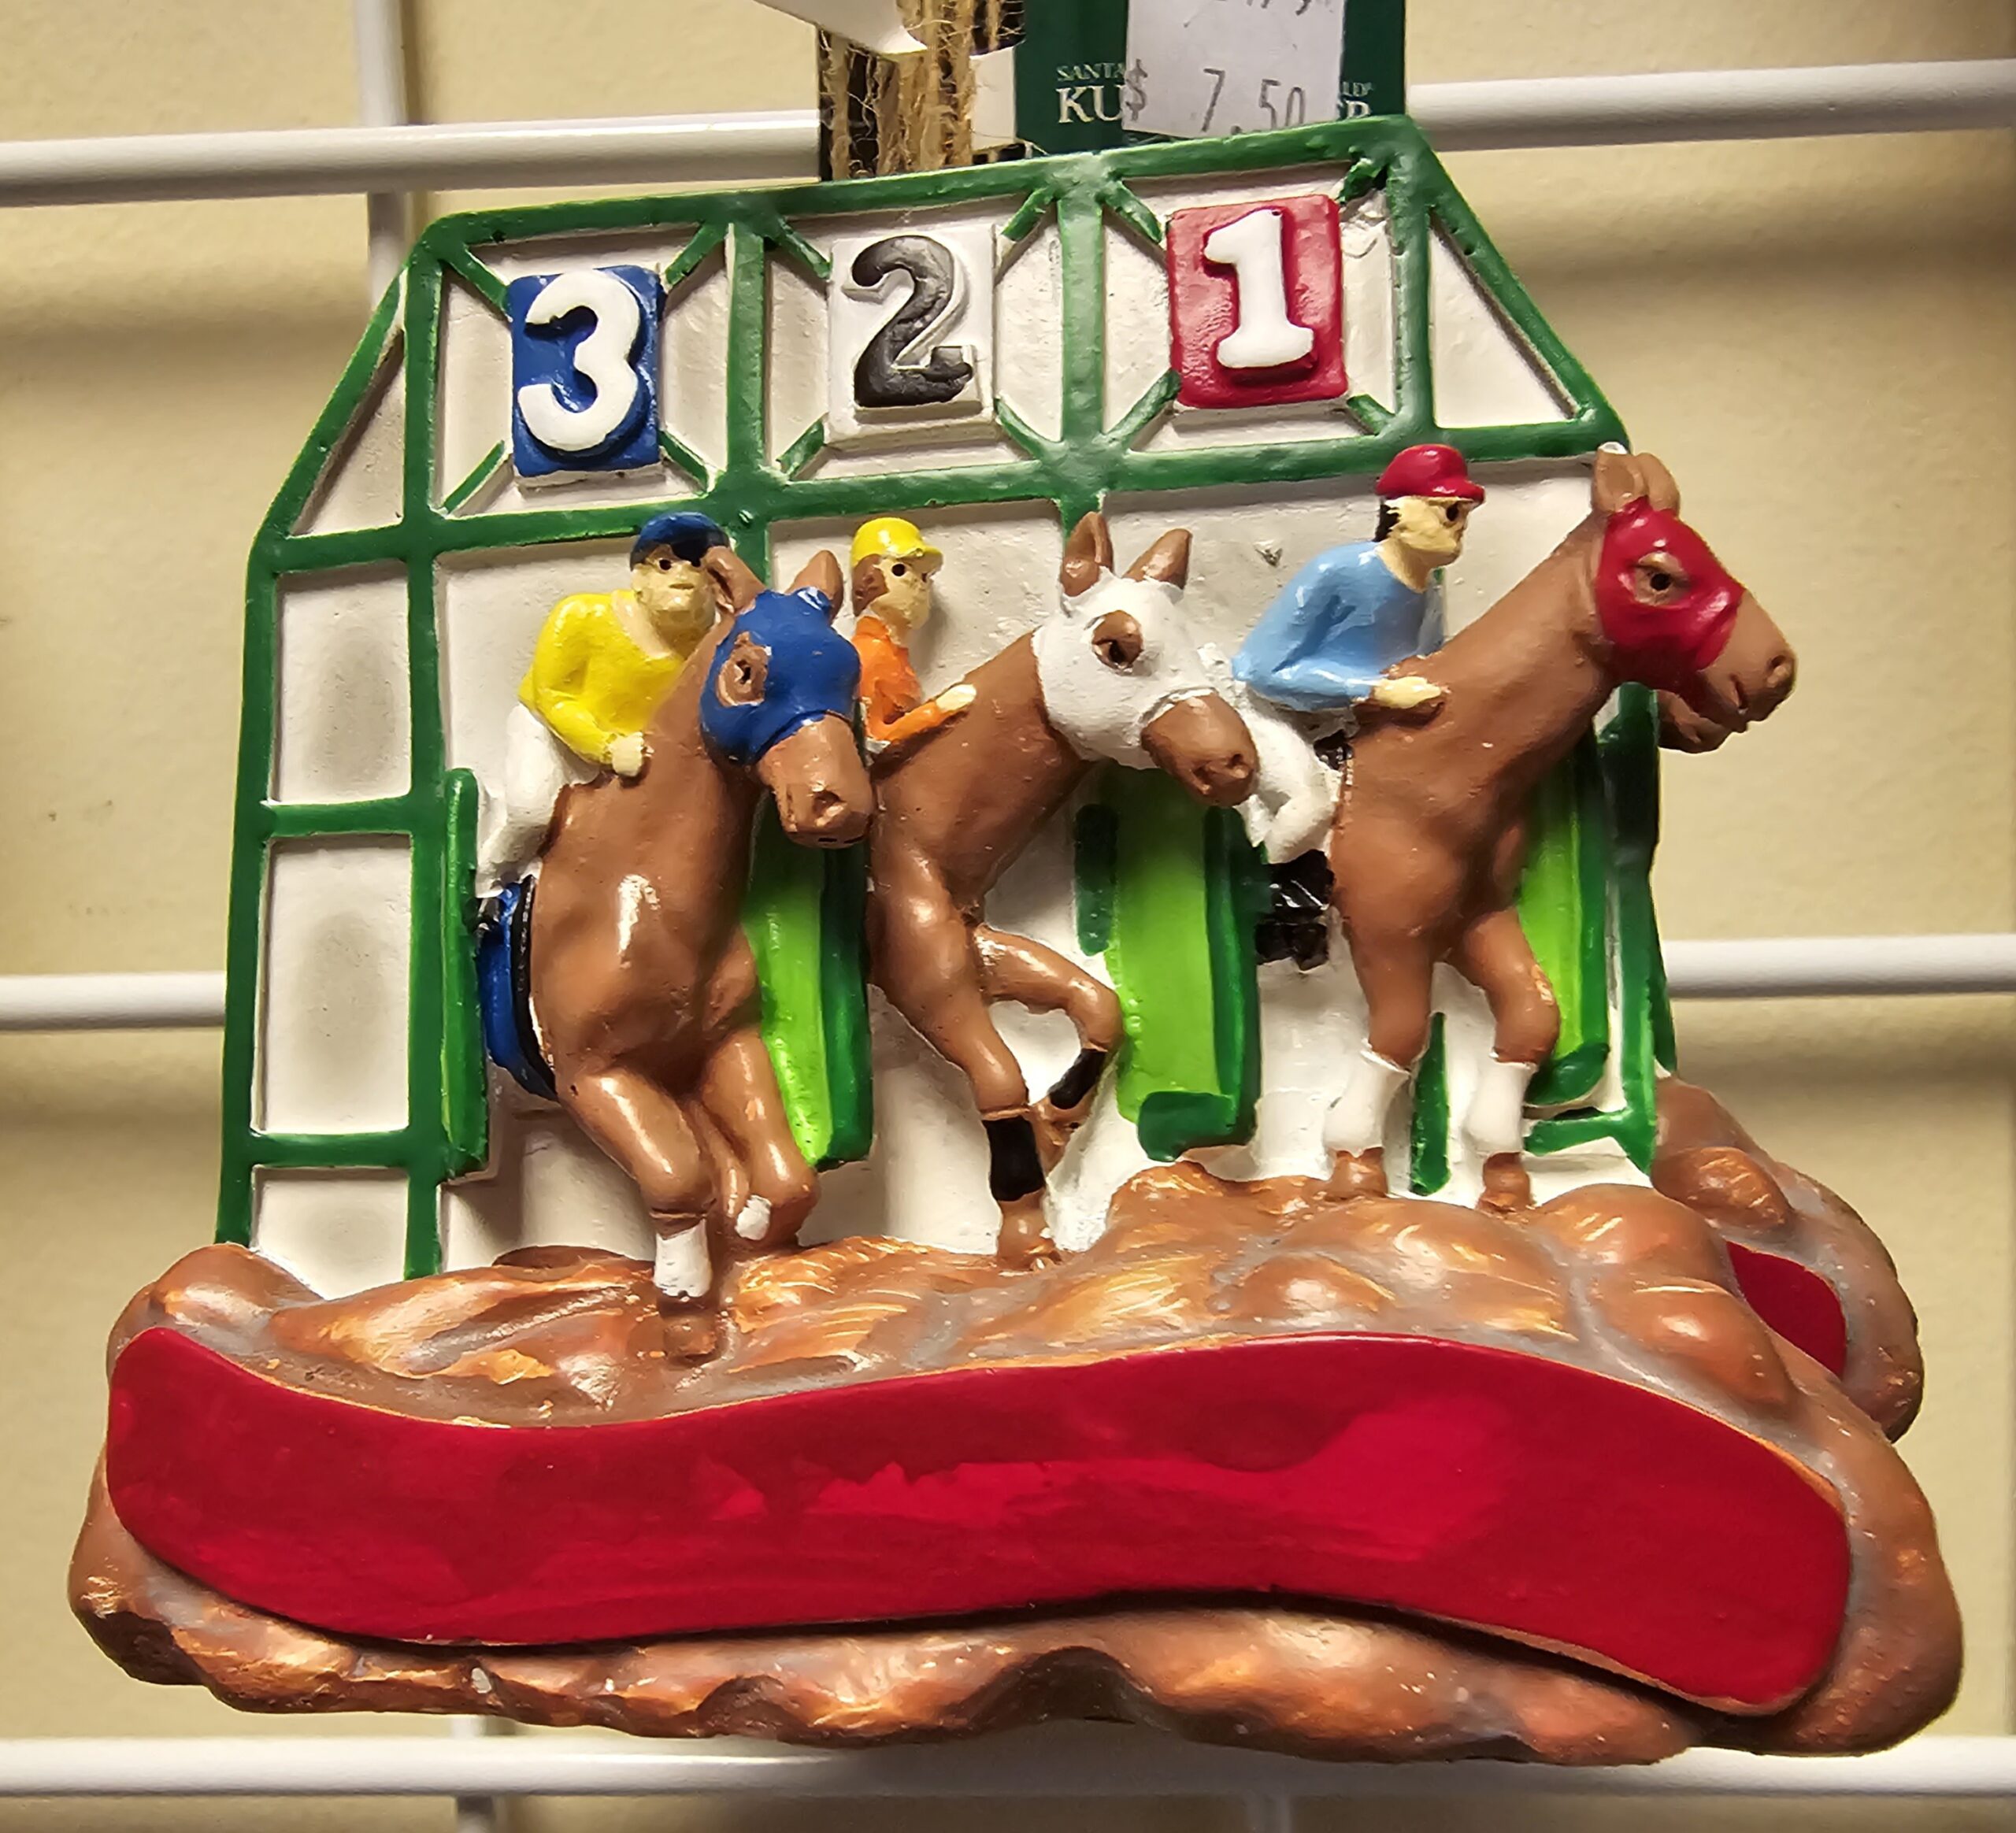 HORSE RACING STARTING GATE ORNAMENT - Winning Touches Equestrian Gifts